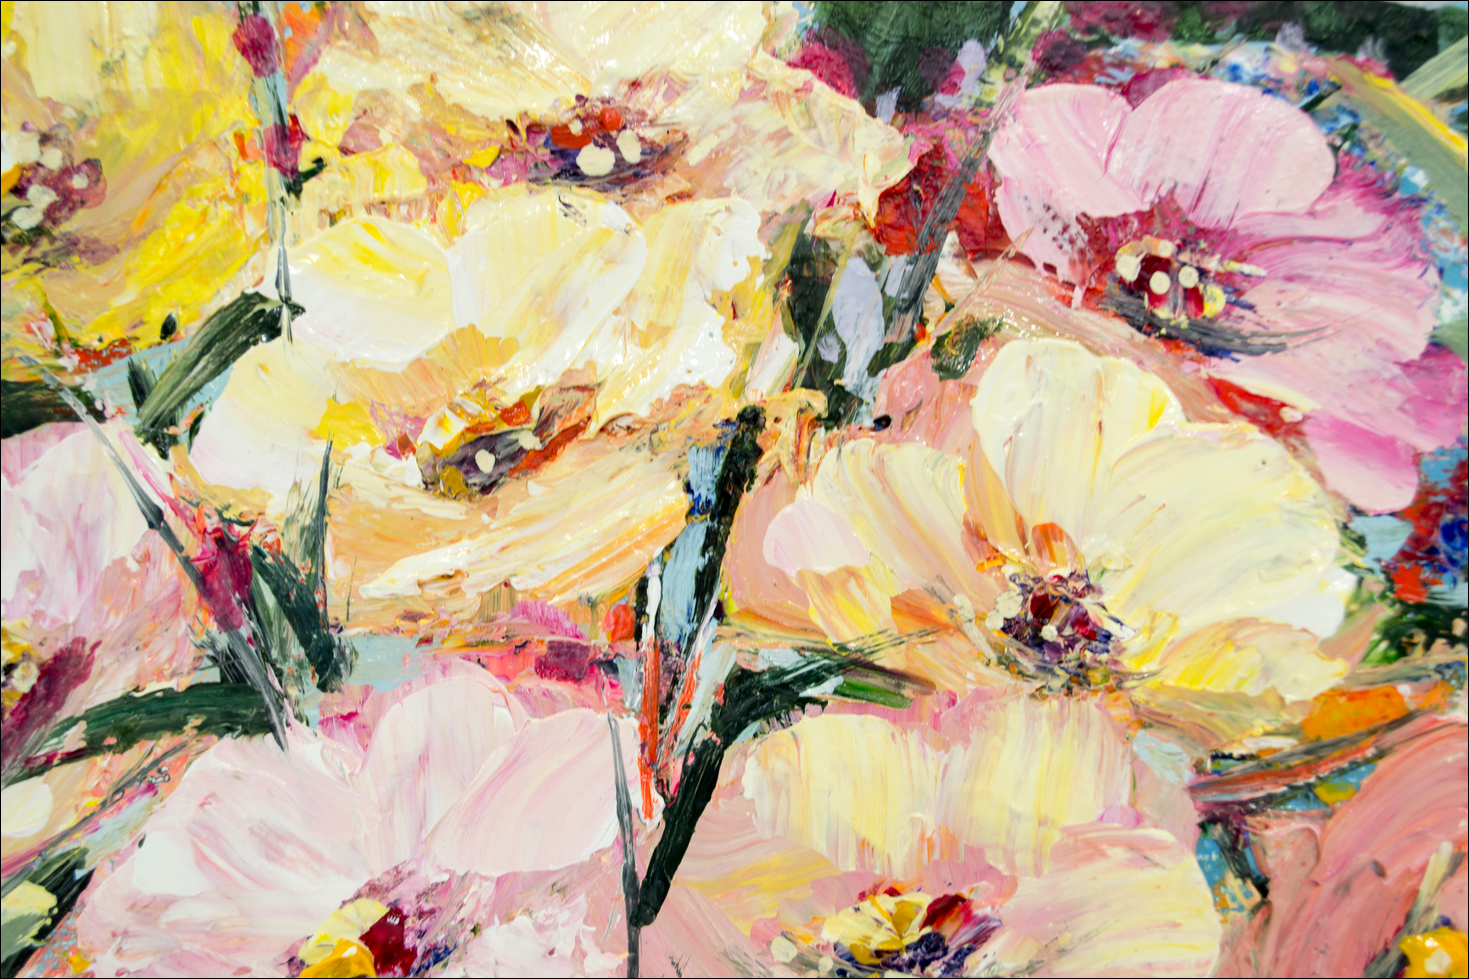 Close Up Detail Of Oil Painting "Soft Pink Floral" By Judith Dalozzo